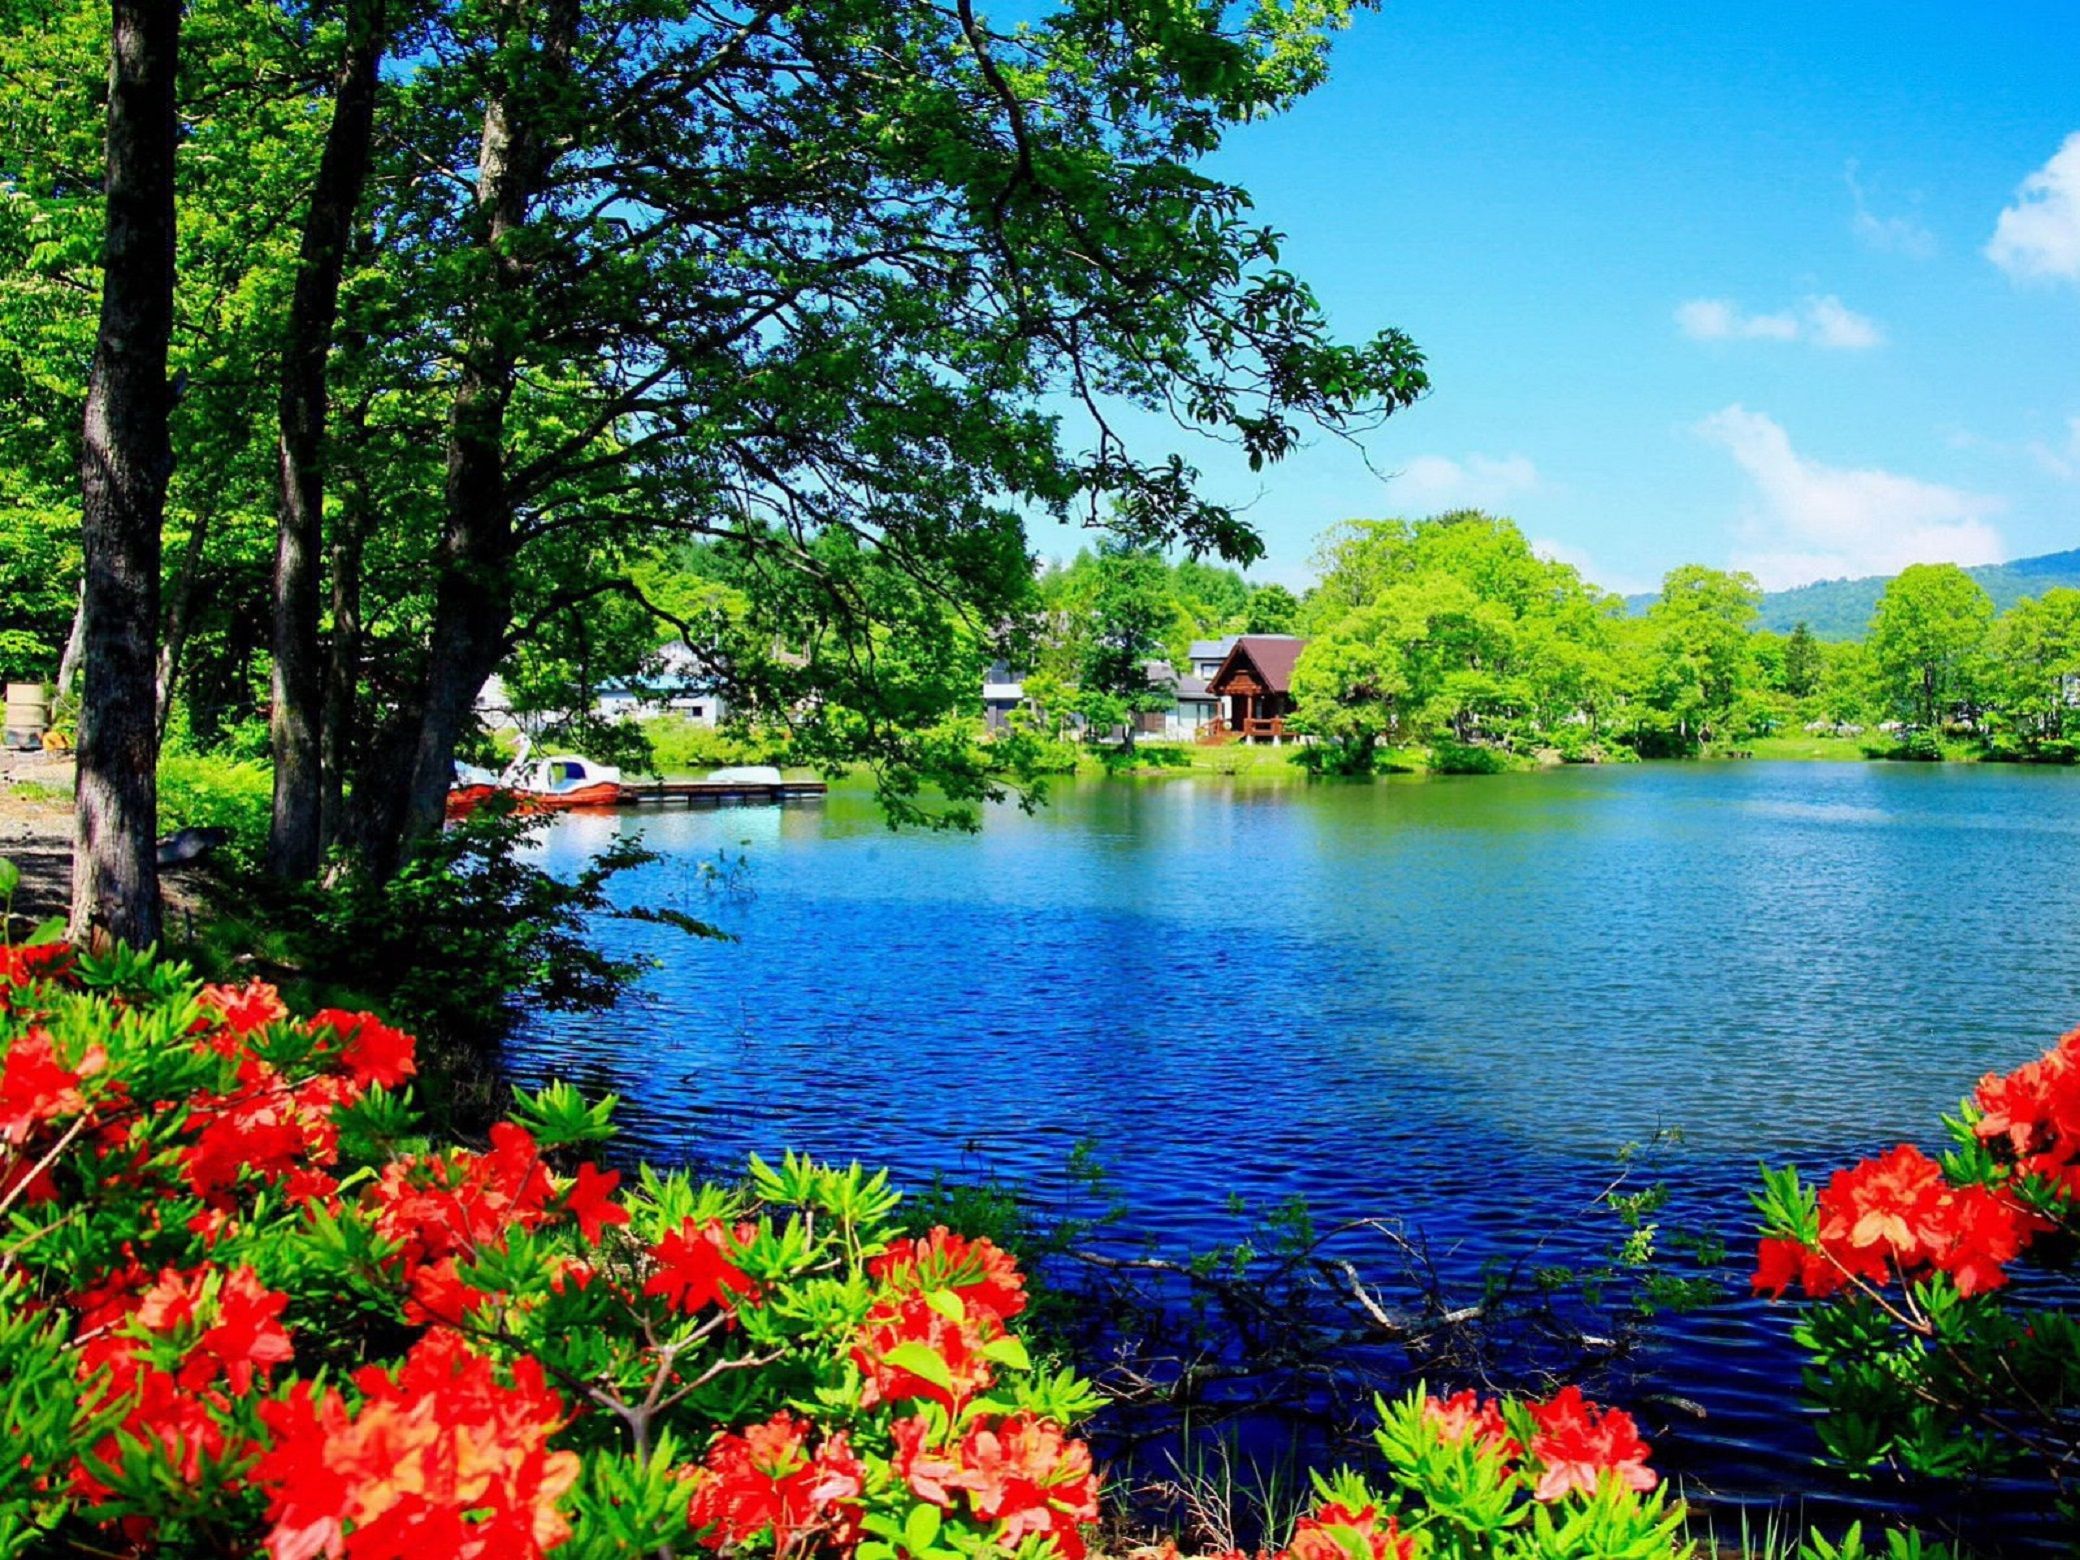 flowers and lake Image - ID: 291416 - Image Abyss